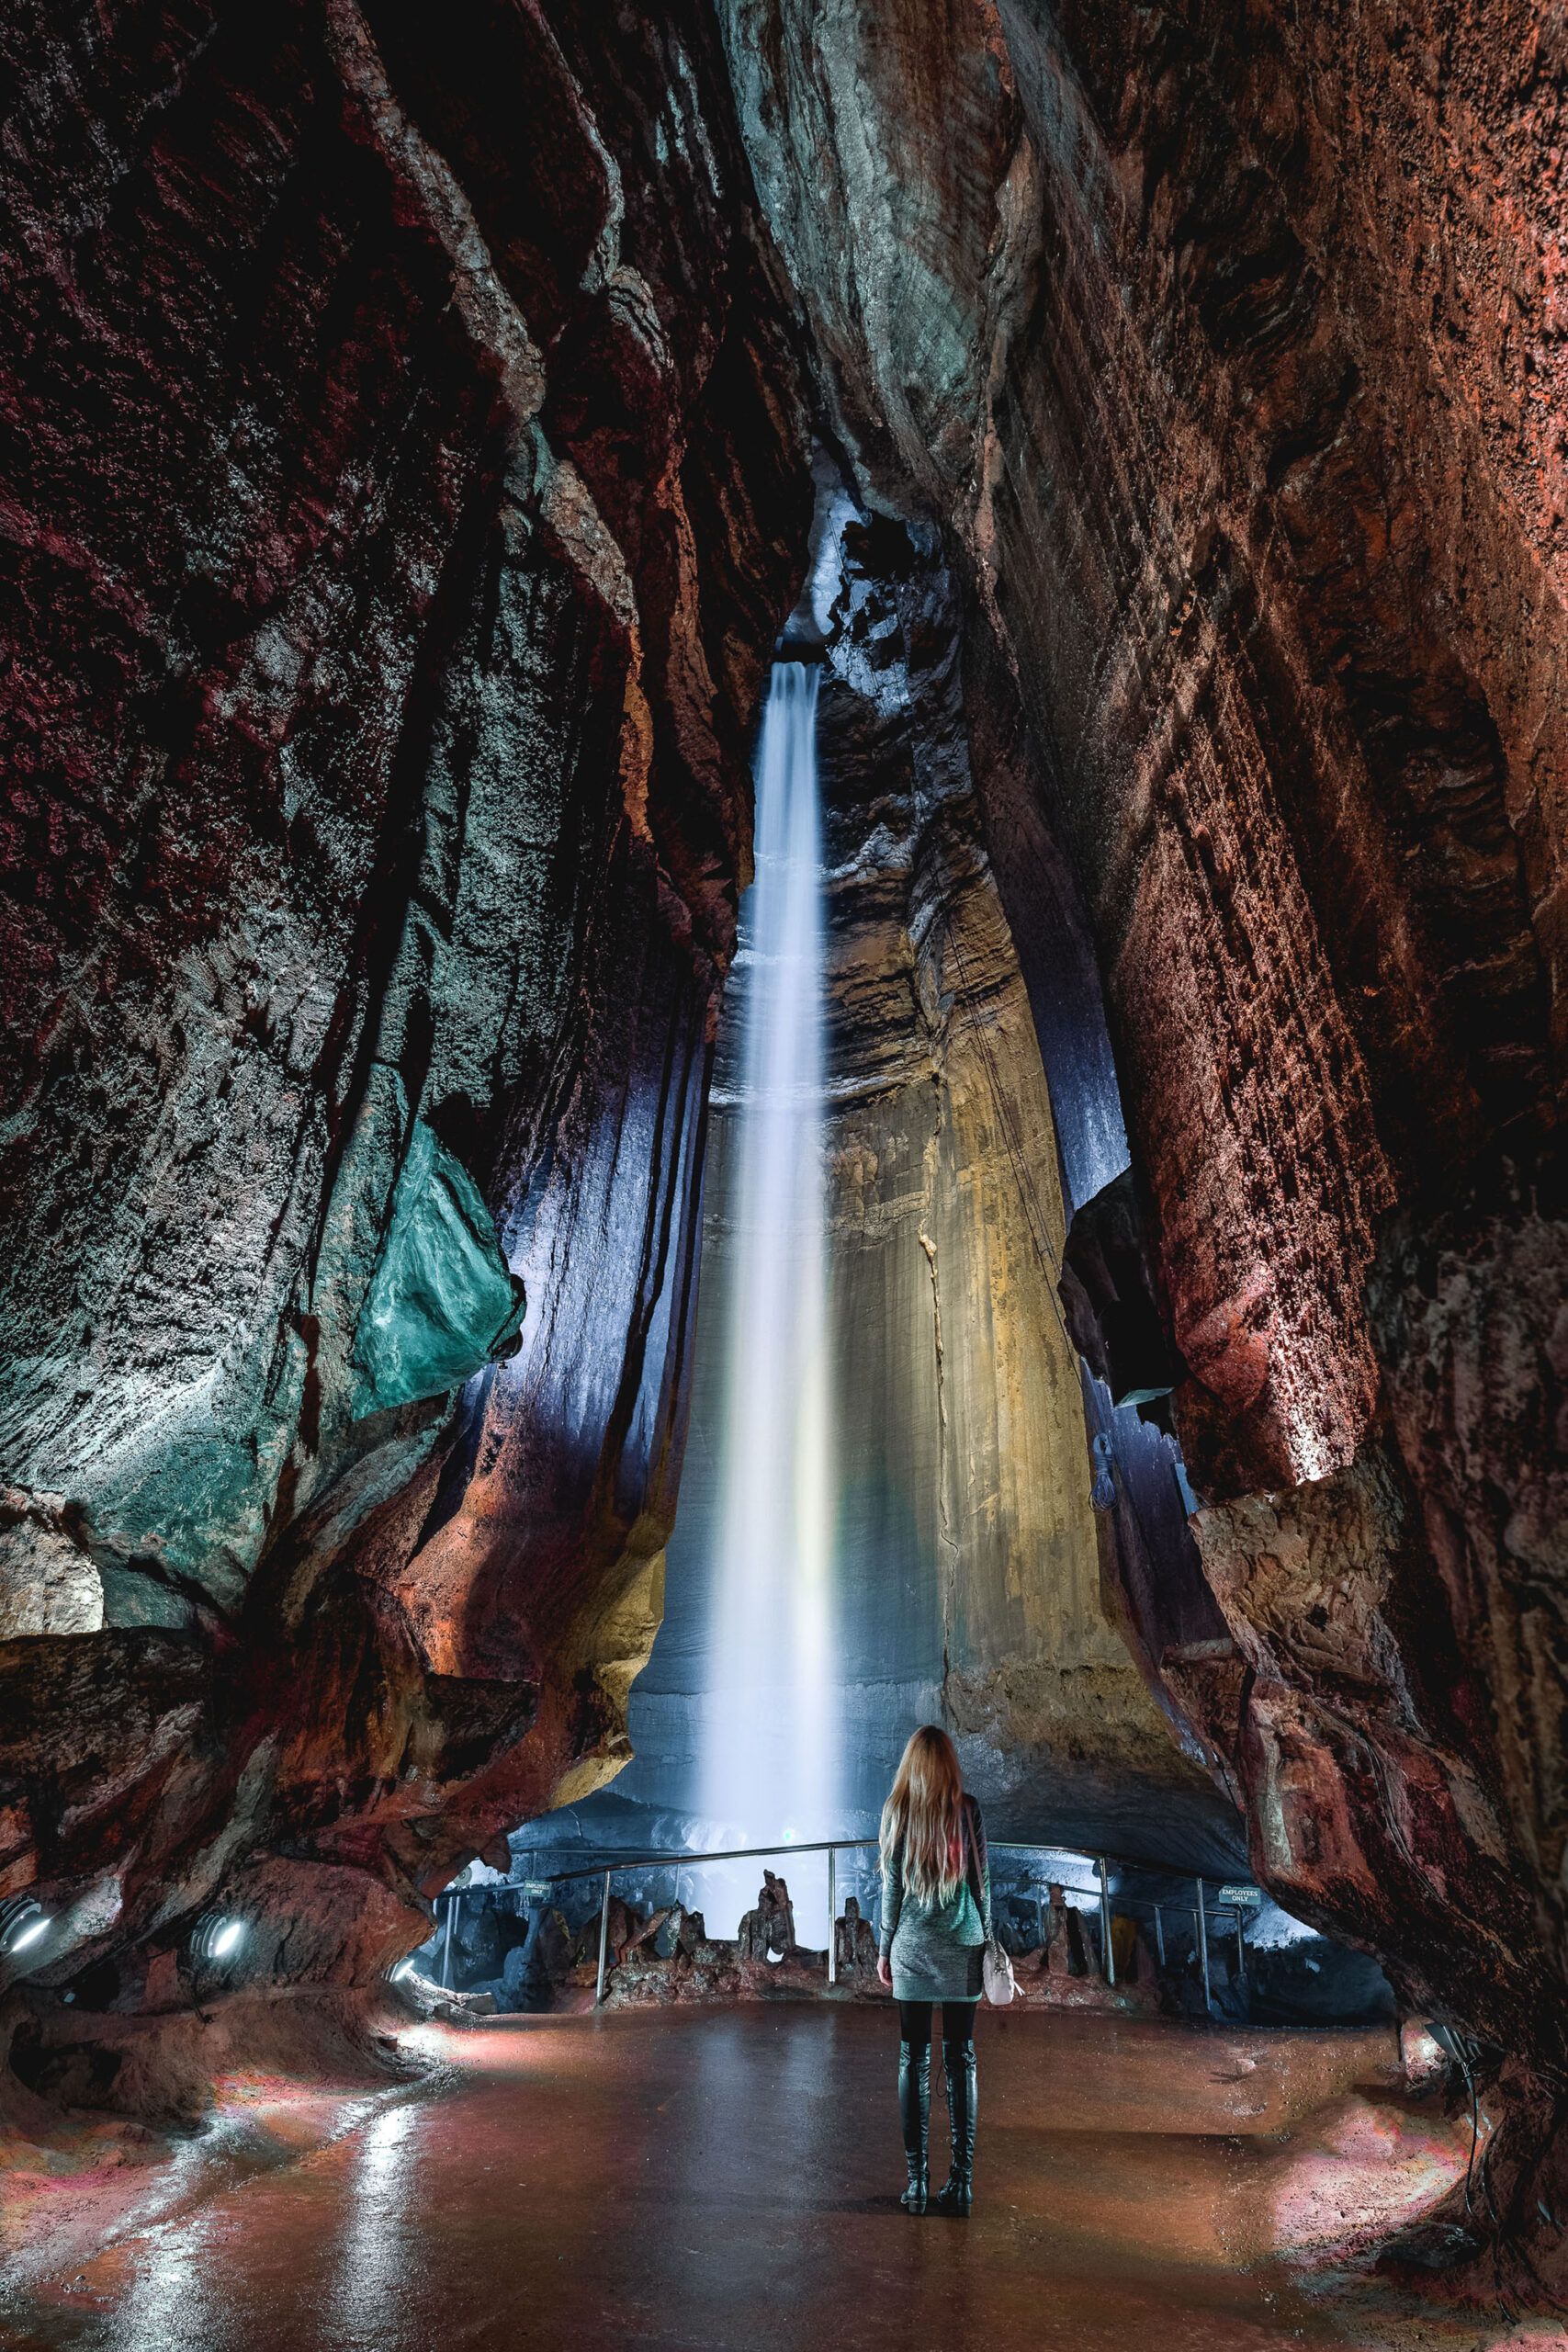 Magic Memories product innovation benefits Ruby Falls guests